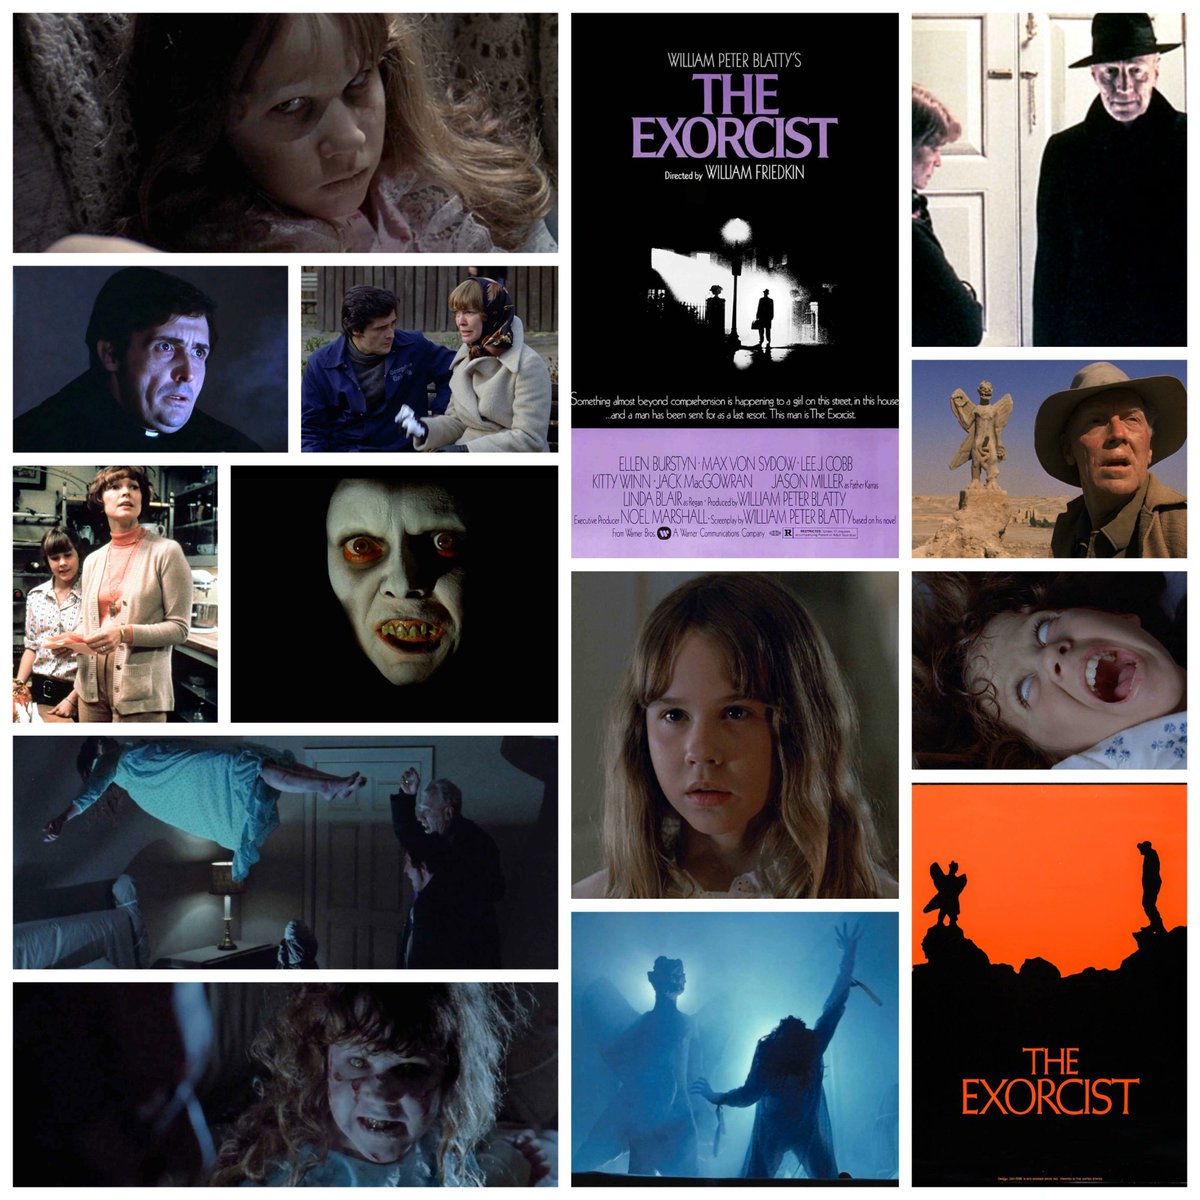 .#WilliamFriedkin was a master and made a huge contribution to the art of film. #TheExorcist was 1 of the first horror film I saw and it greatly influenced my love of genre films. Thankfully his films live on for future generations #thefrenchconnection #toliveanddieinla +++